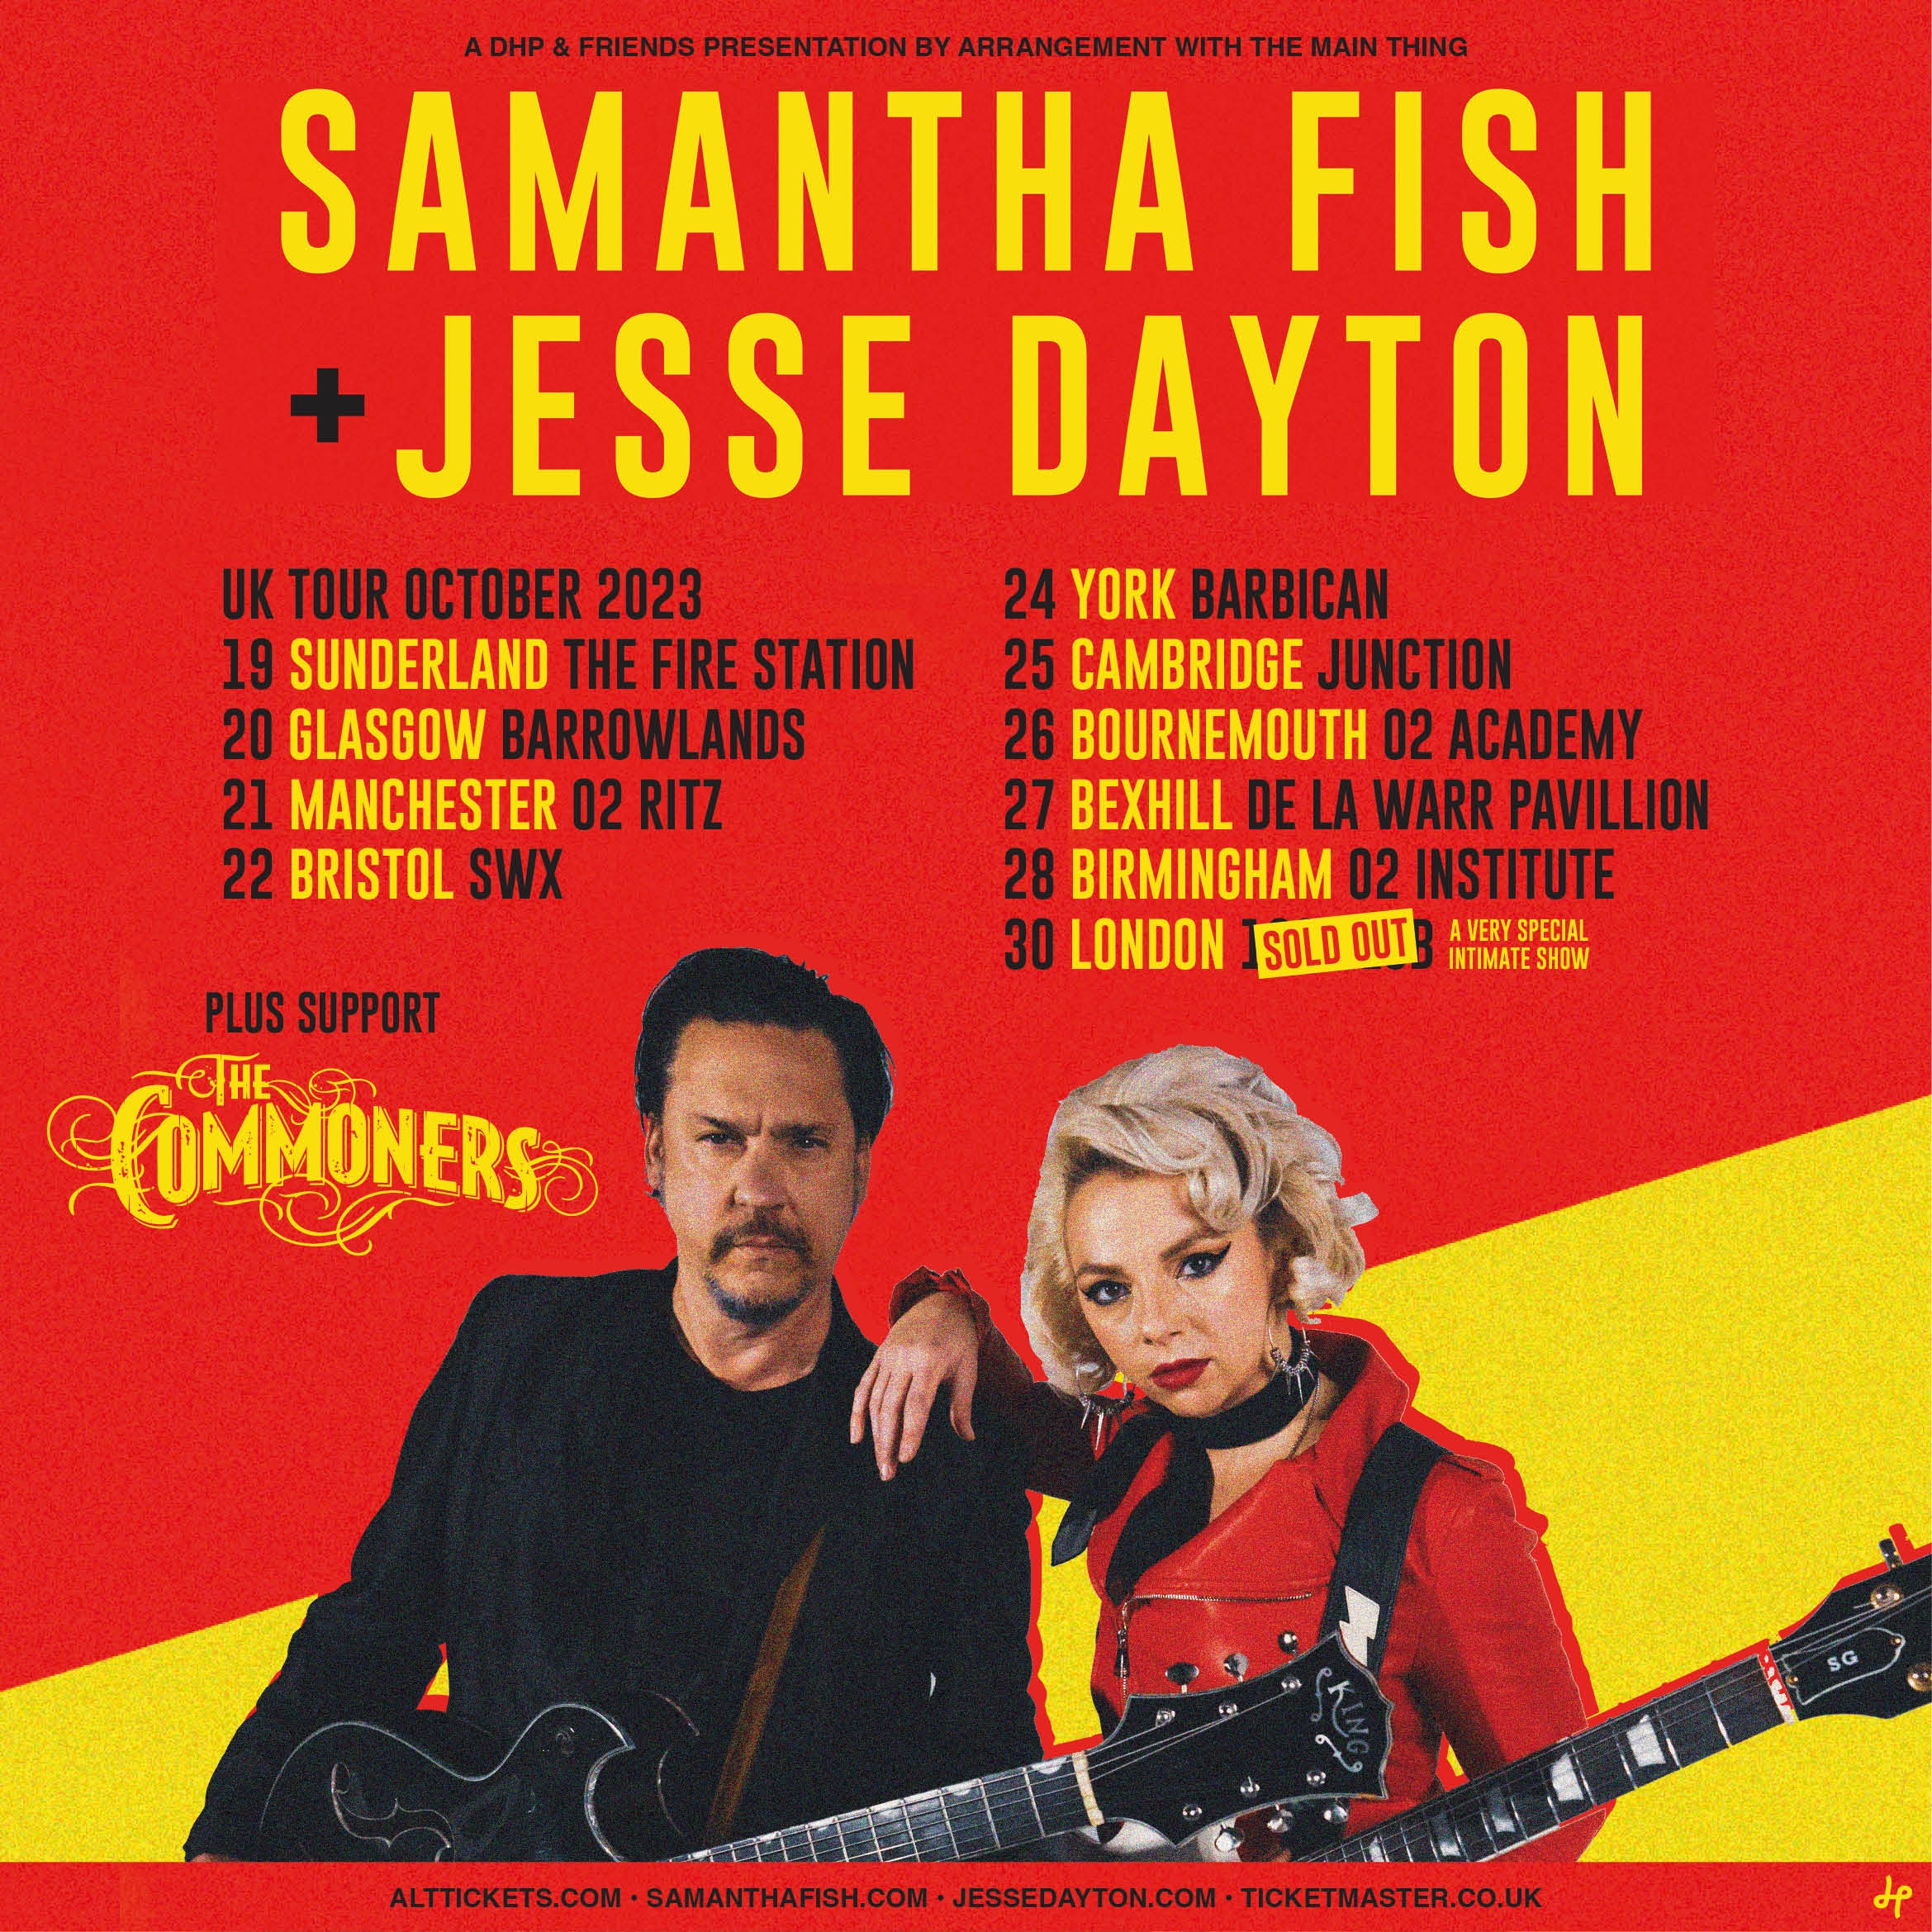 SAMANTHA FISH & JESSE DAYTON ANNOUNCE NEW SINGLE & MUSIC VIDEO “LOVER ON THE SIDE” AHEAD OF OCTOBER 2023 UK TOUR